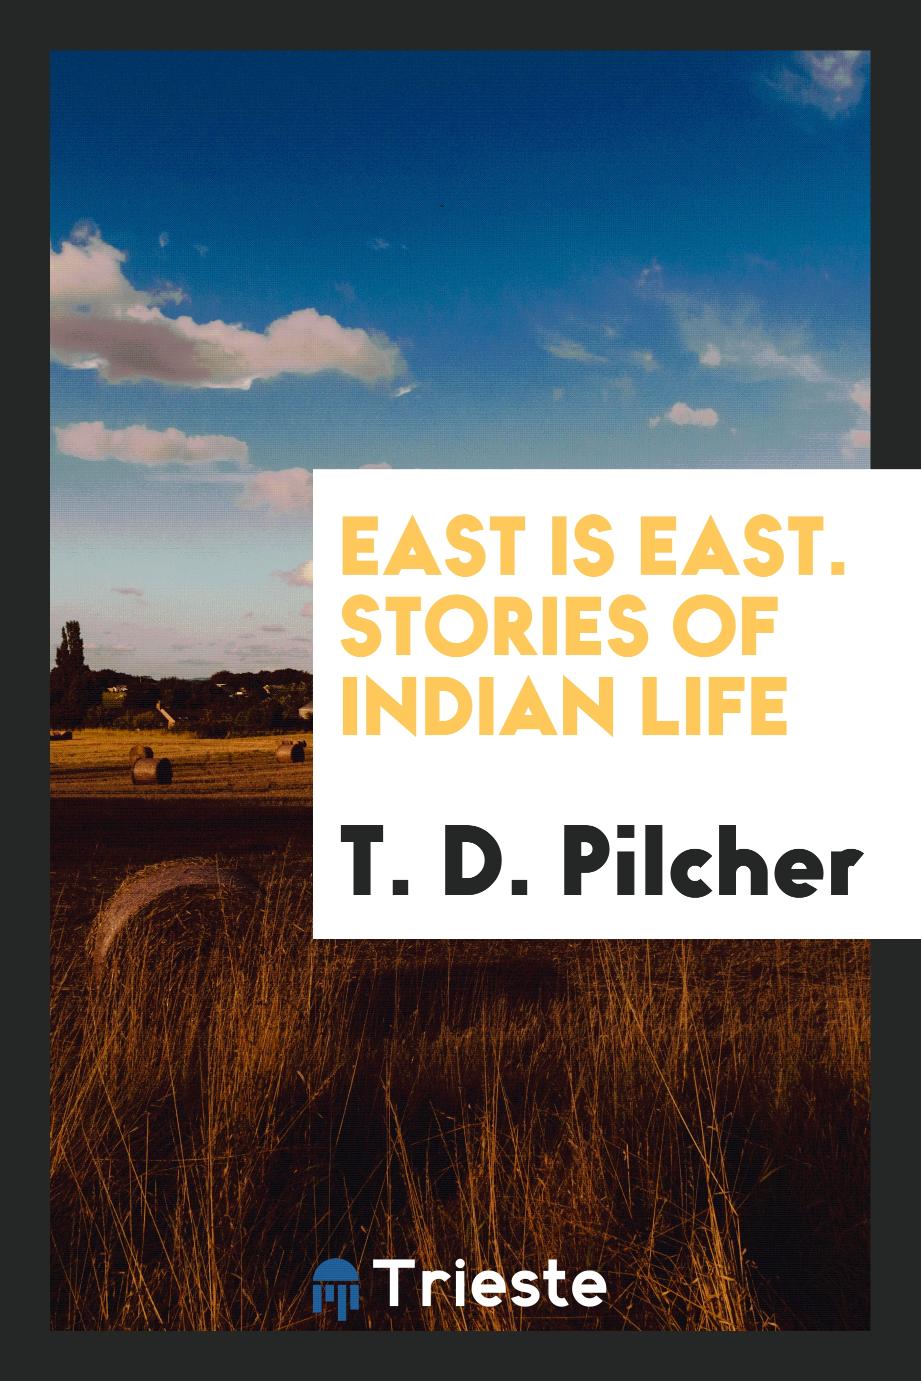 East is East. Stories of Indian life